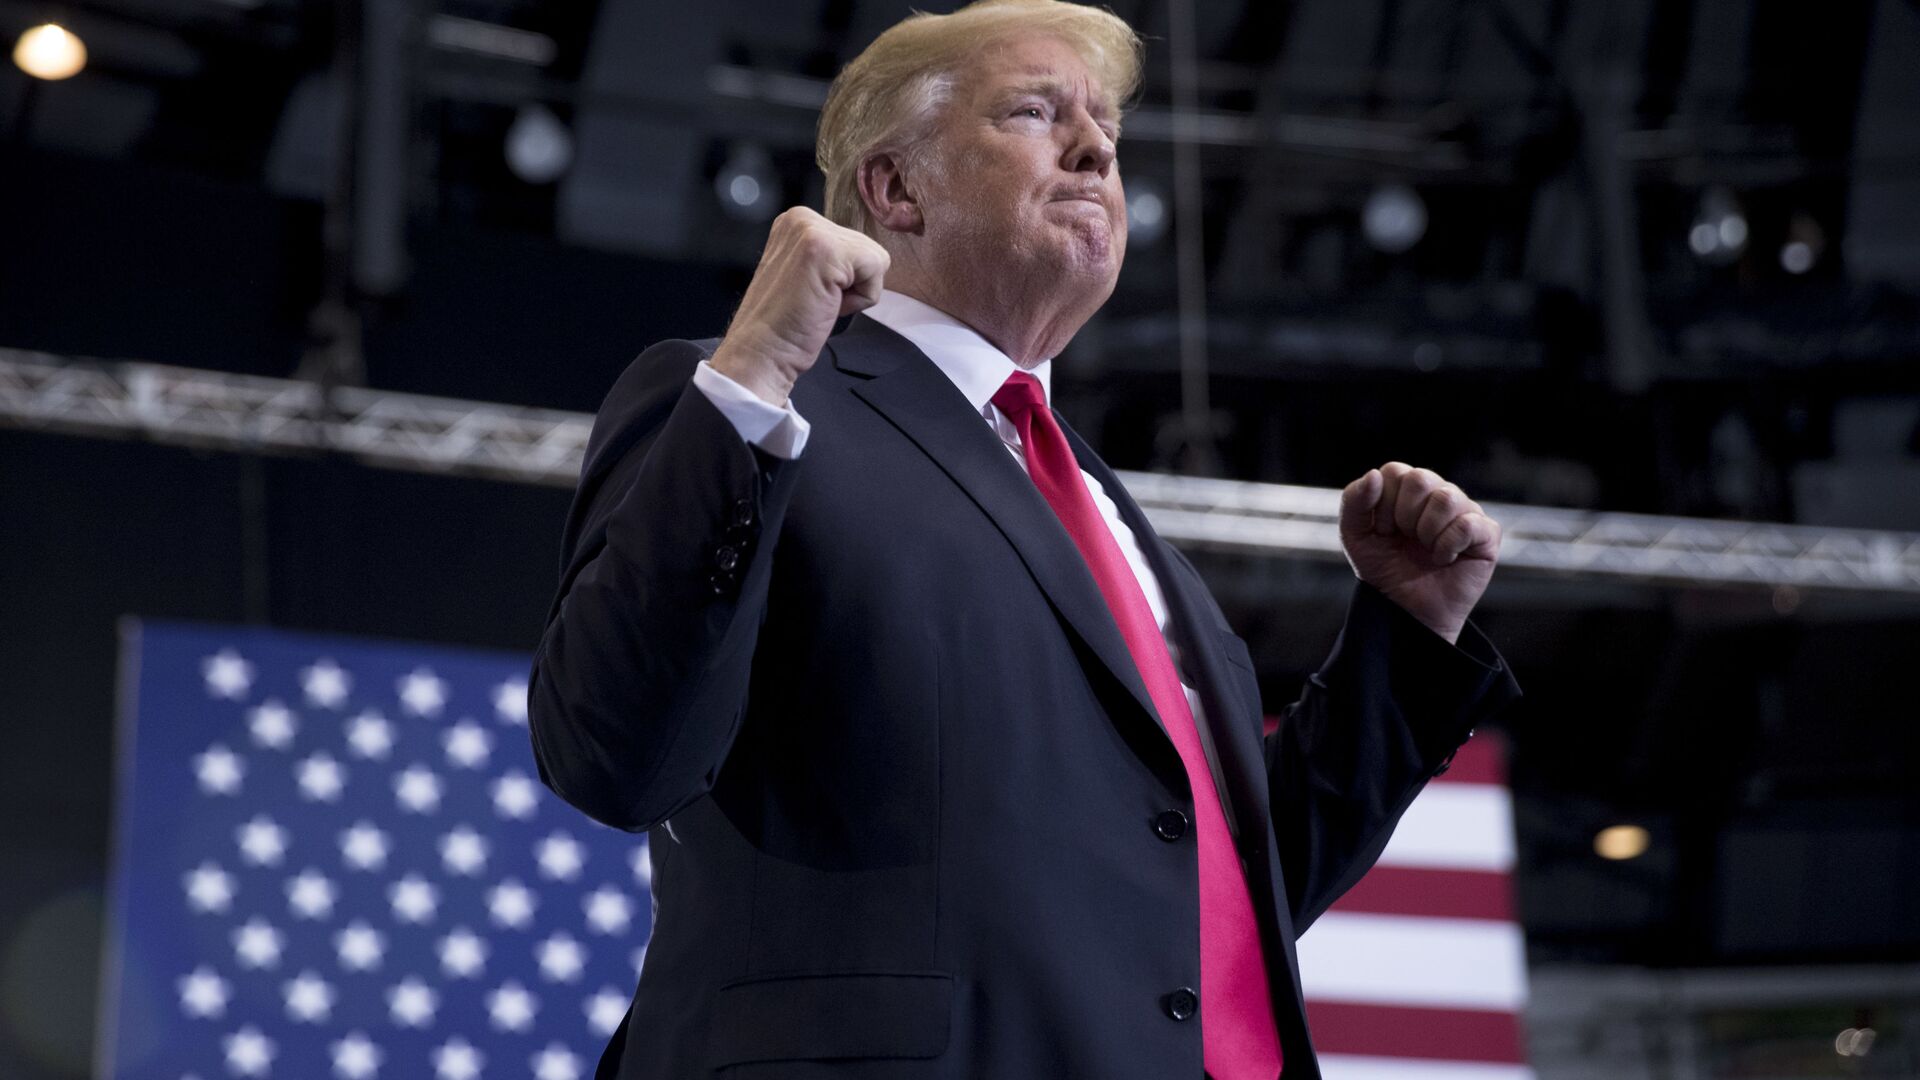 President Donald Trump shakes his fists as he finishes speaking at a rally at the Gaylord Opryland Resort and Convention Center, Tuesday, May 29, 2018, in Nashville, Tenn - Sputnik International, 1920, 27.06.2021